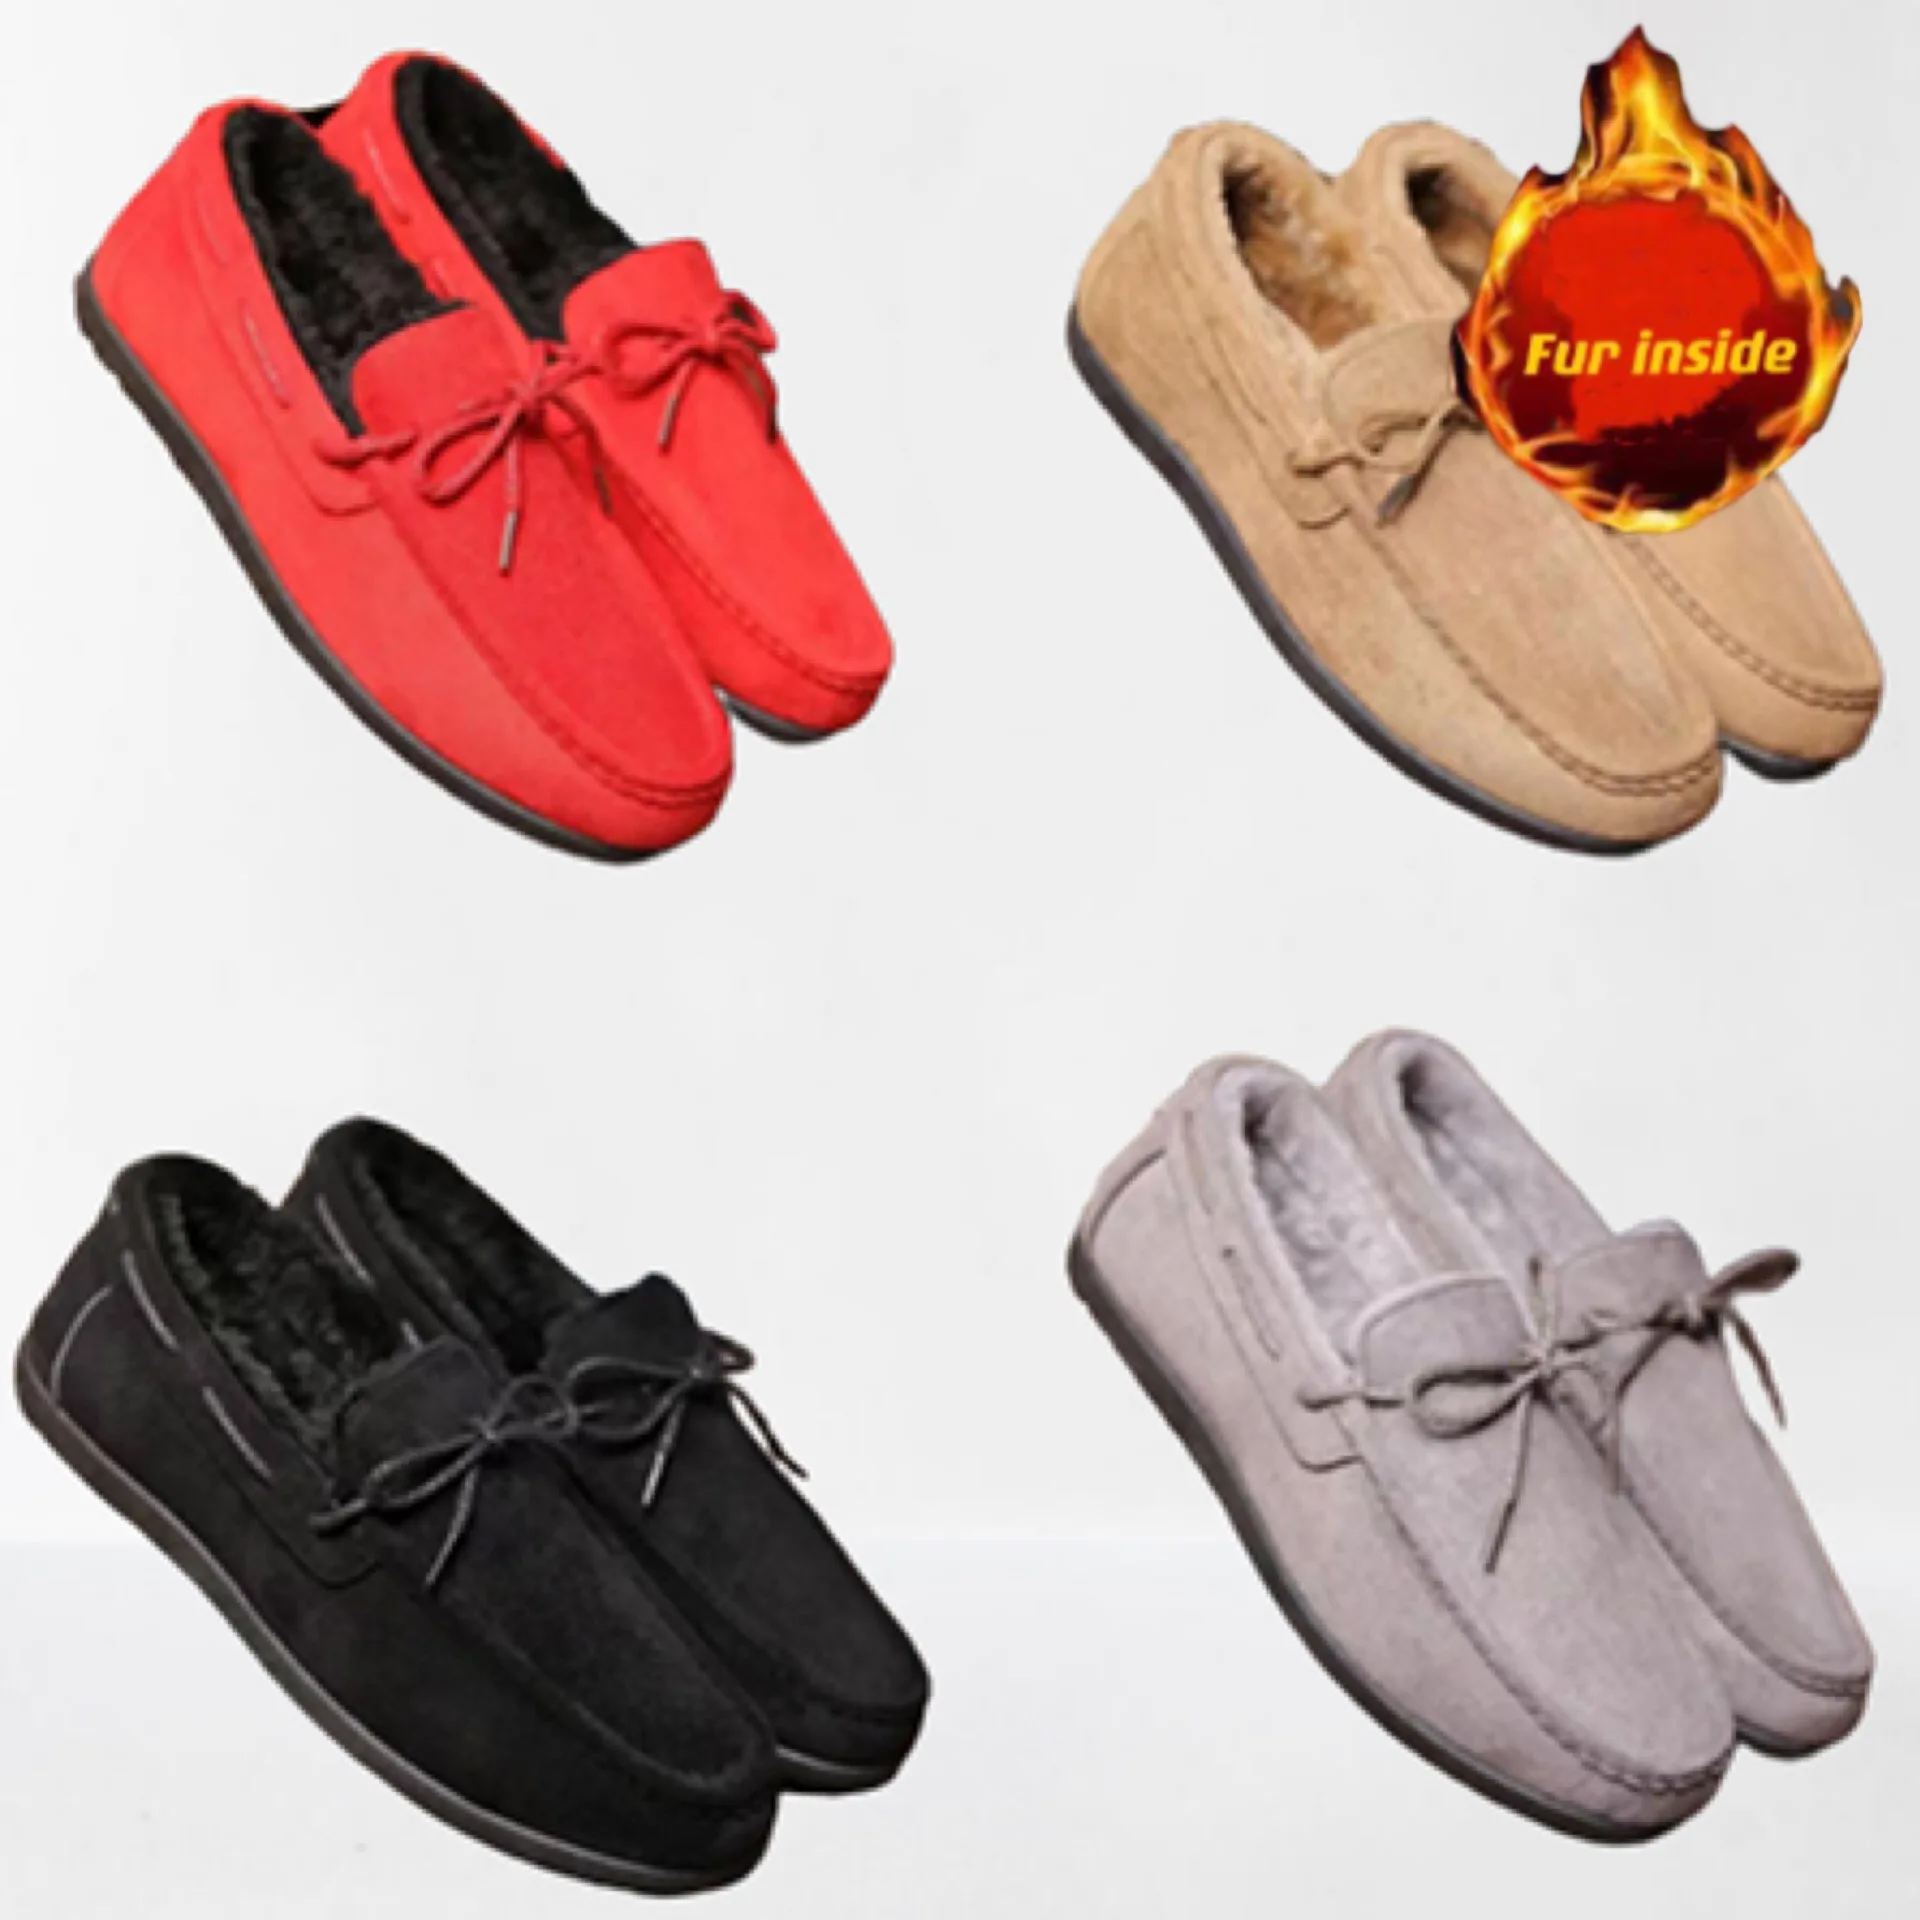 Wholesale 2021 New Arrival hot sale Faux Suede leather loafer shoes with inside Fashion Sneaker Men Low Price Shoes From m.alibaba.com